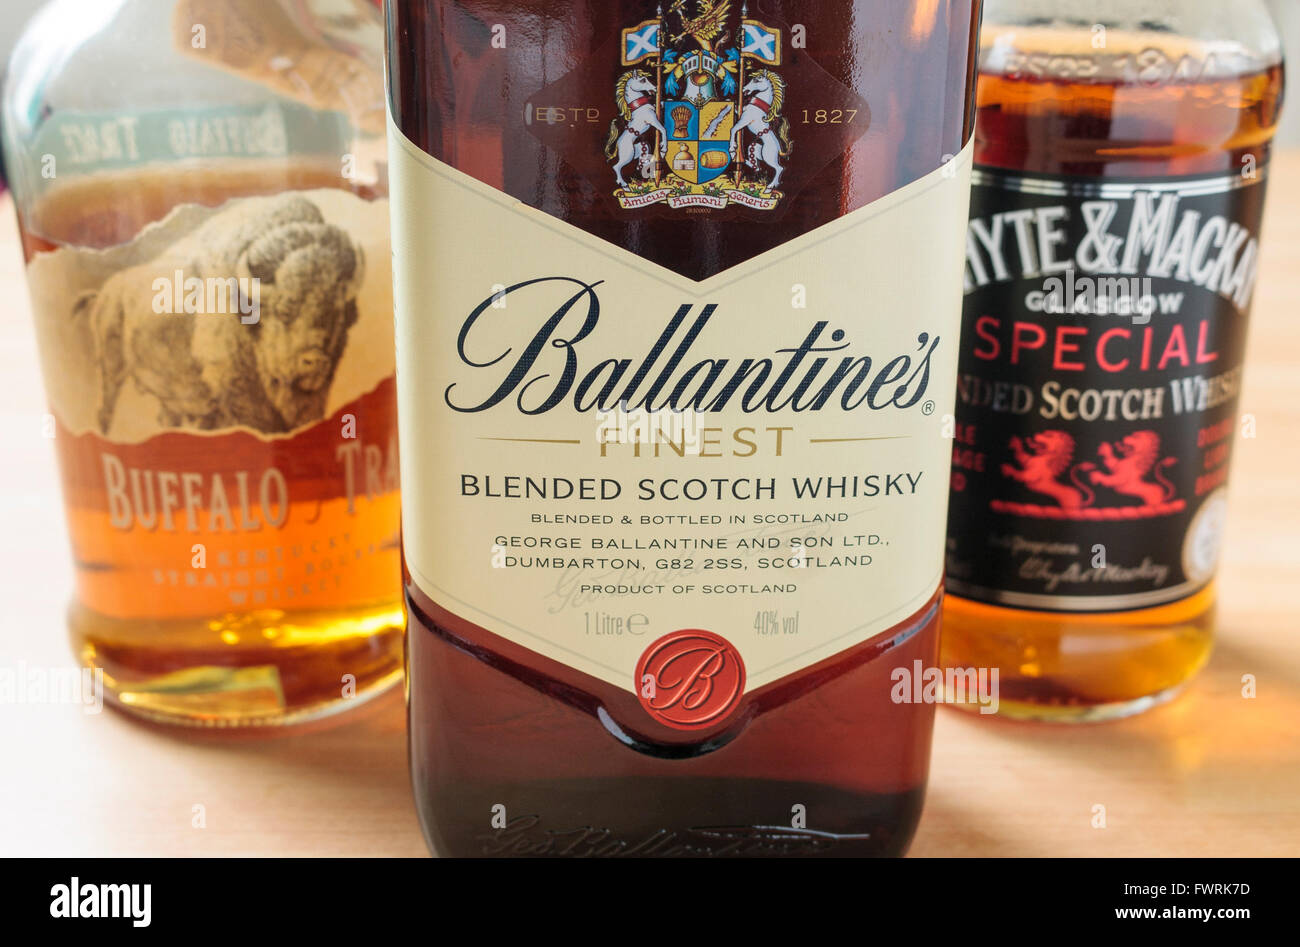 A selection of different types of whiskey - Buffalo Trace (Bourbon), Ballantine's (Scotch) and Whyte & Mackay (Scotch) Stock Photo